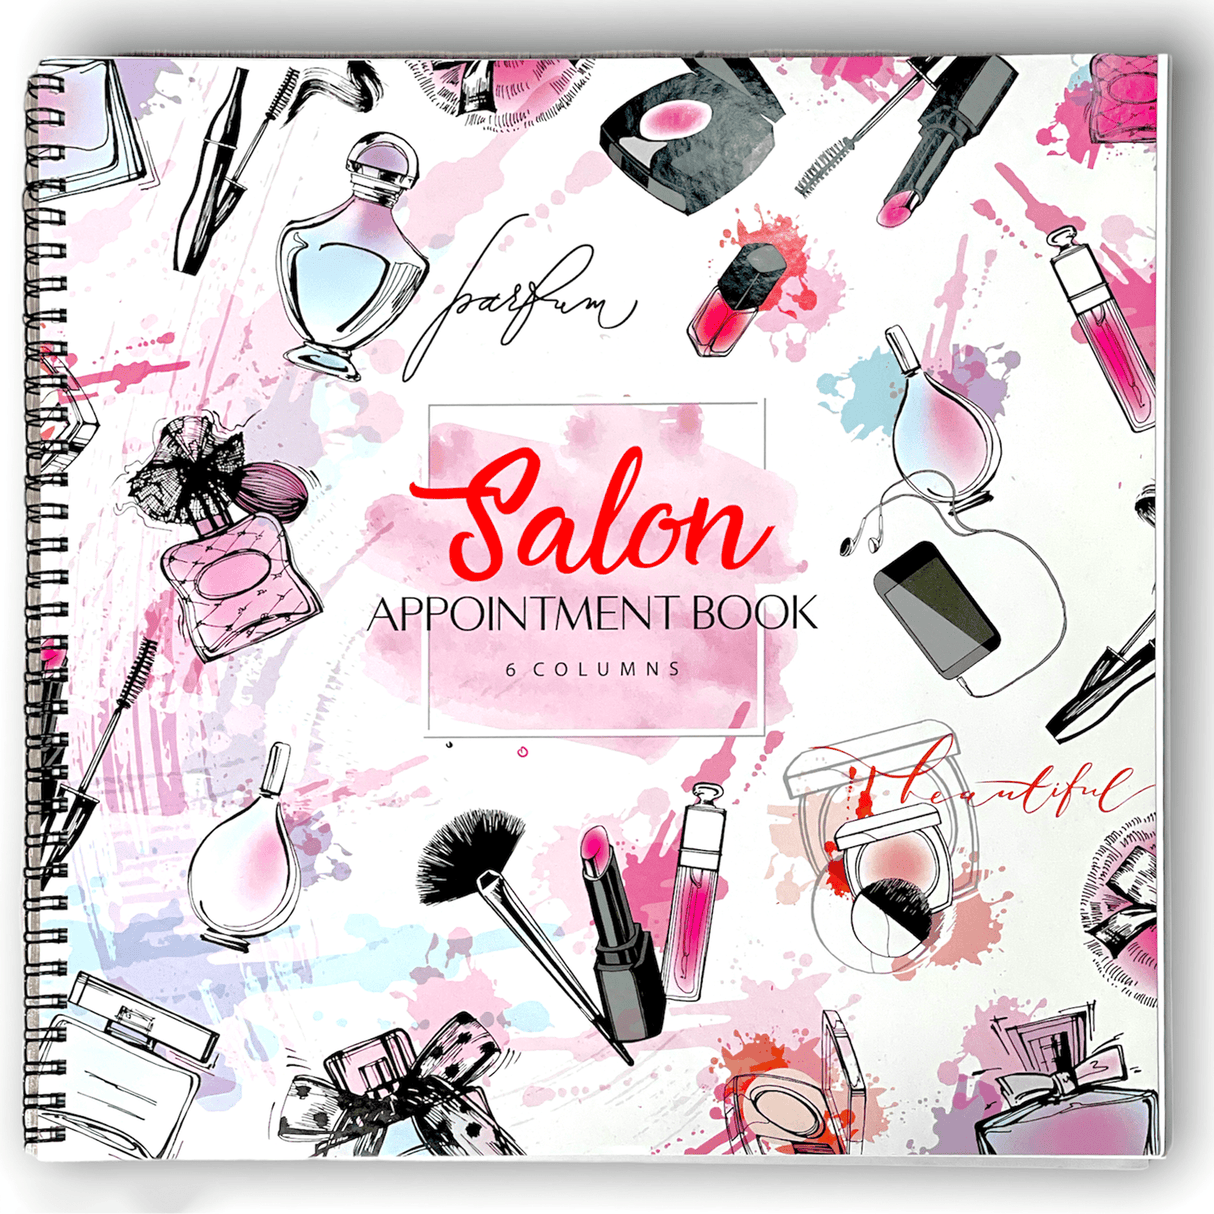 JNBS Salon Appointment Book 6 Columns 2 styles (150 pages)